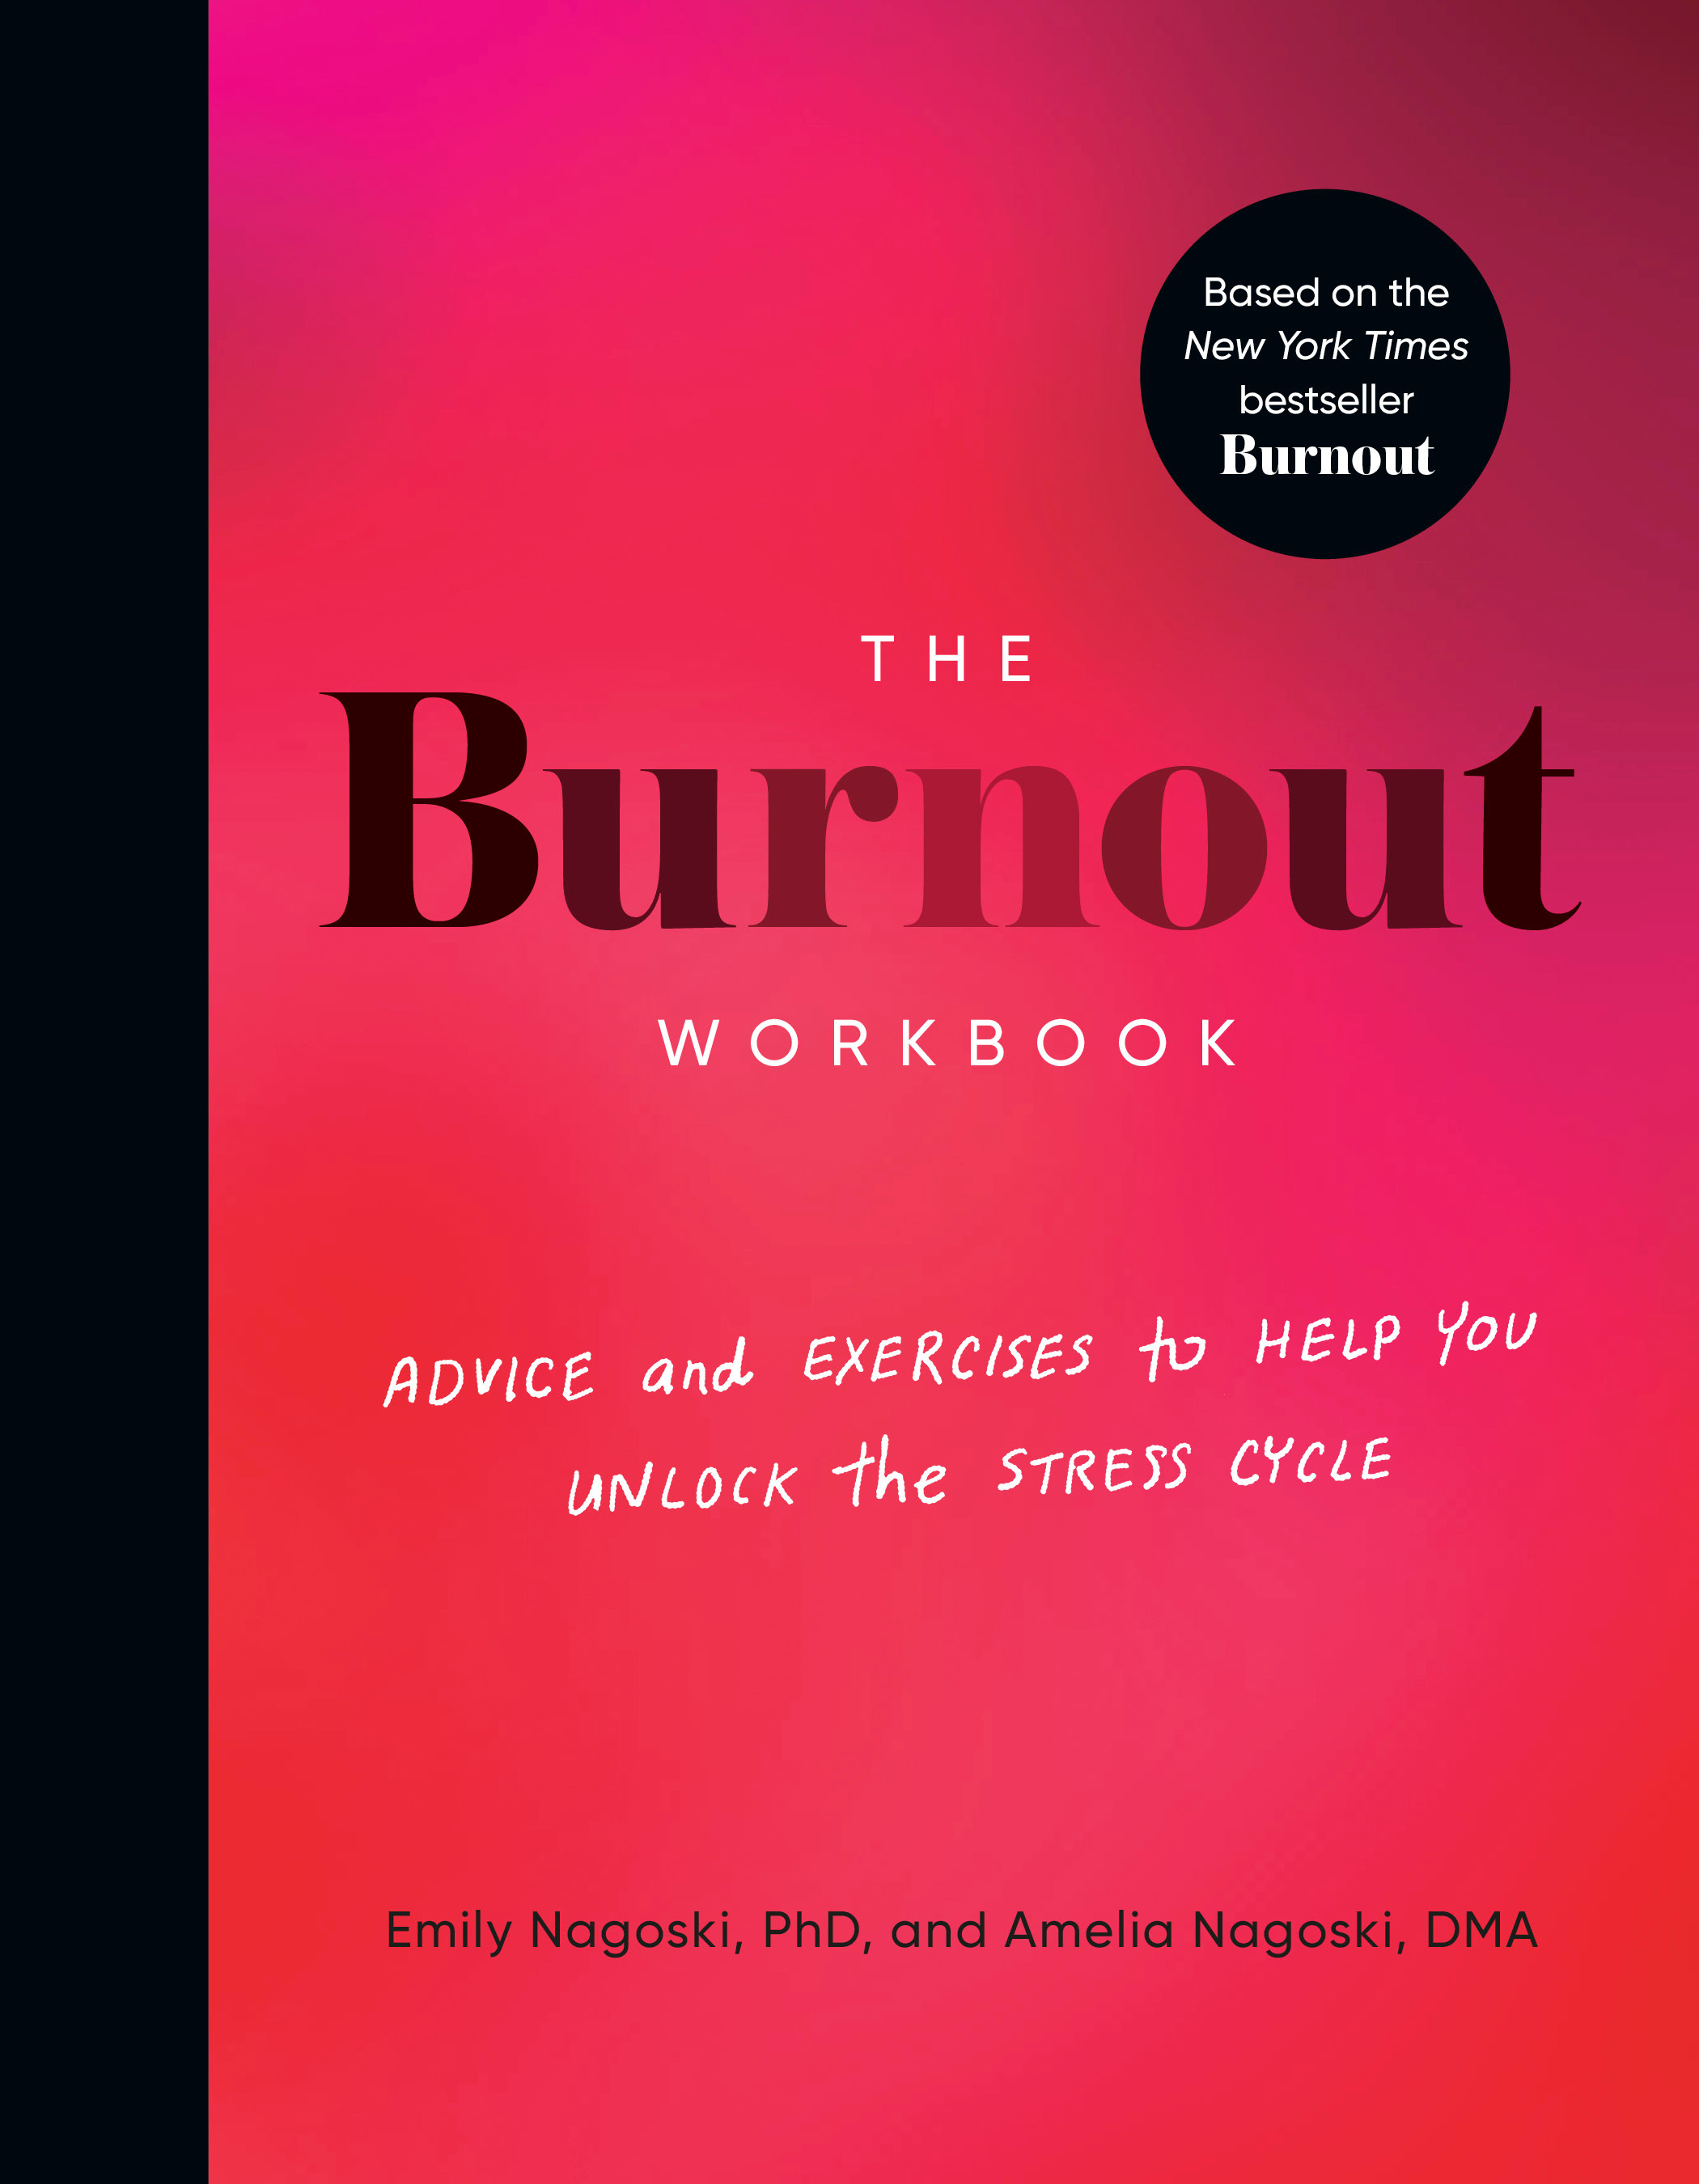 The Burnout Workbook : Advice and Exercises to Help You Unlock the Stress Cycle | Psychology & Self-Improvement